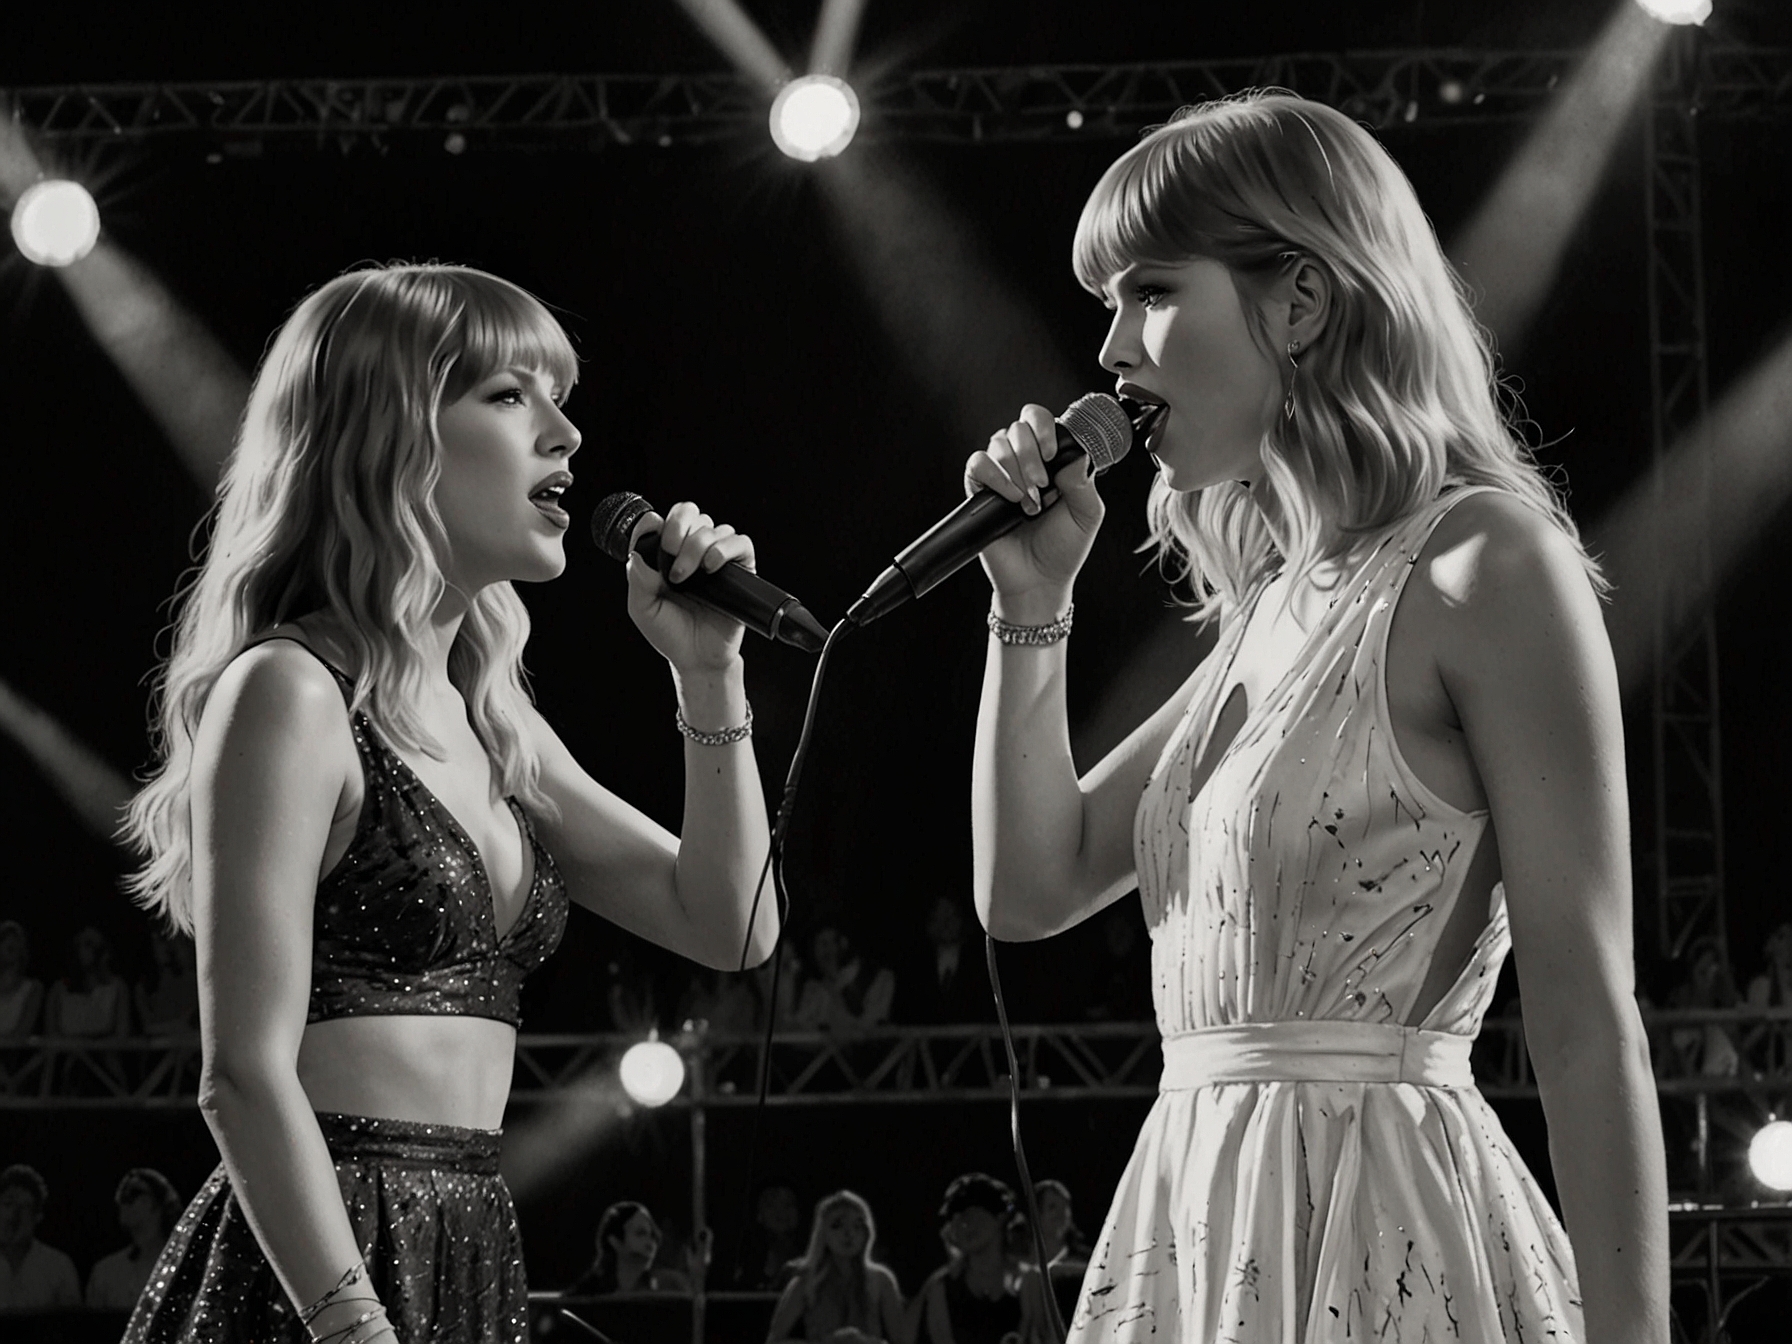 Gracie Abrams and Taylor Swift performing together on stage during the 'Eras Tour,' with Abrams showcasing her emotive vocals alongside Swift's harmonies.